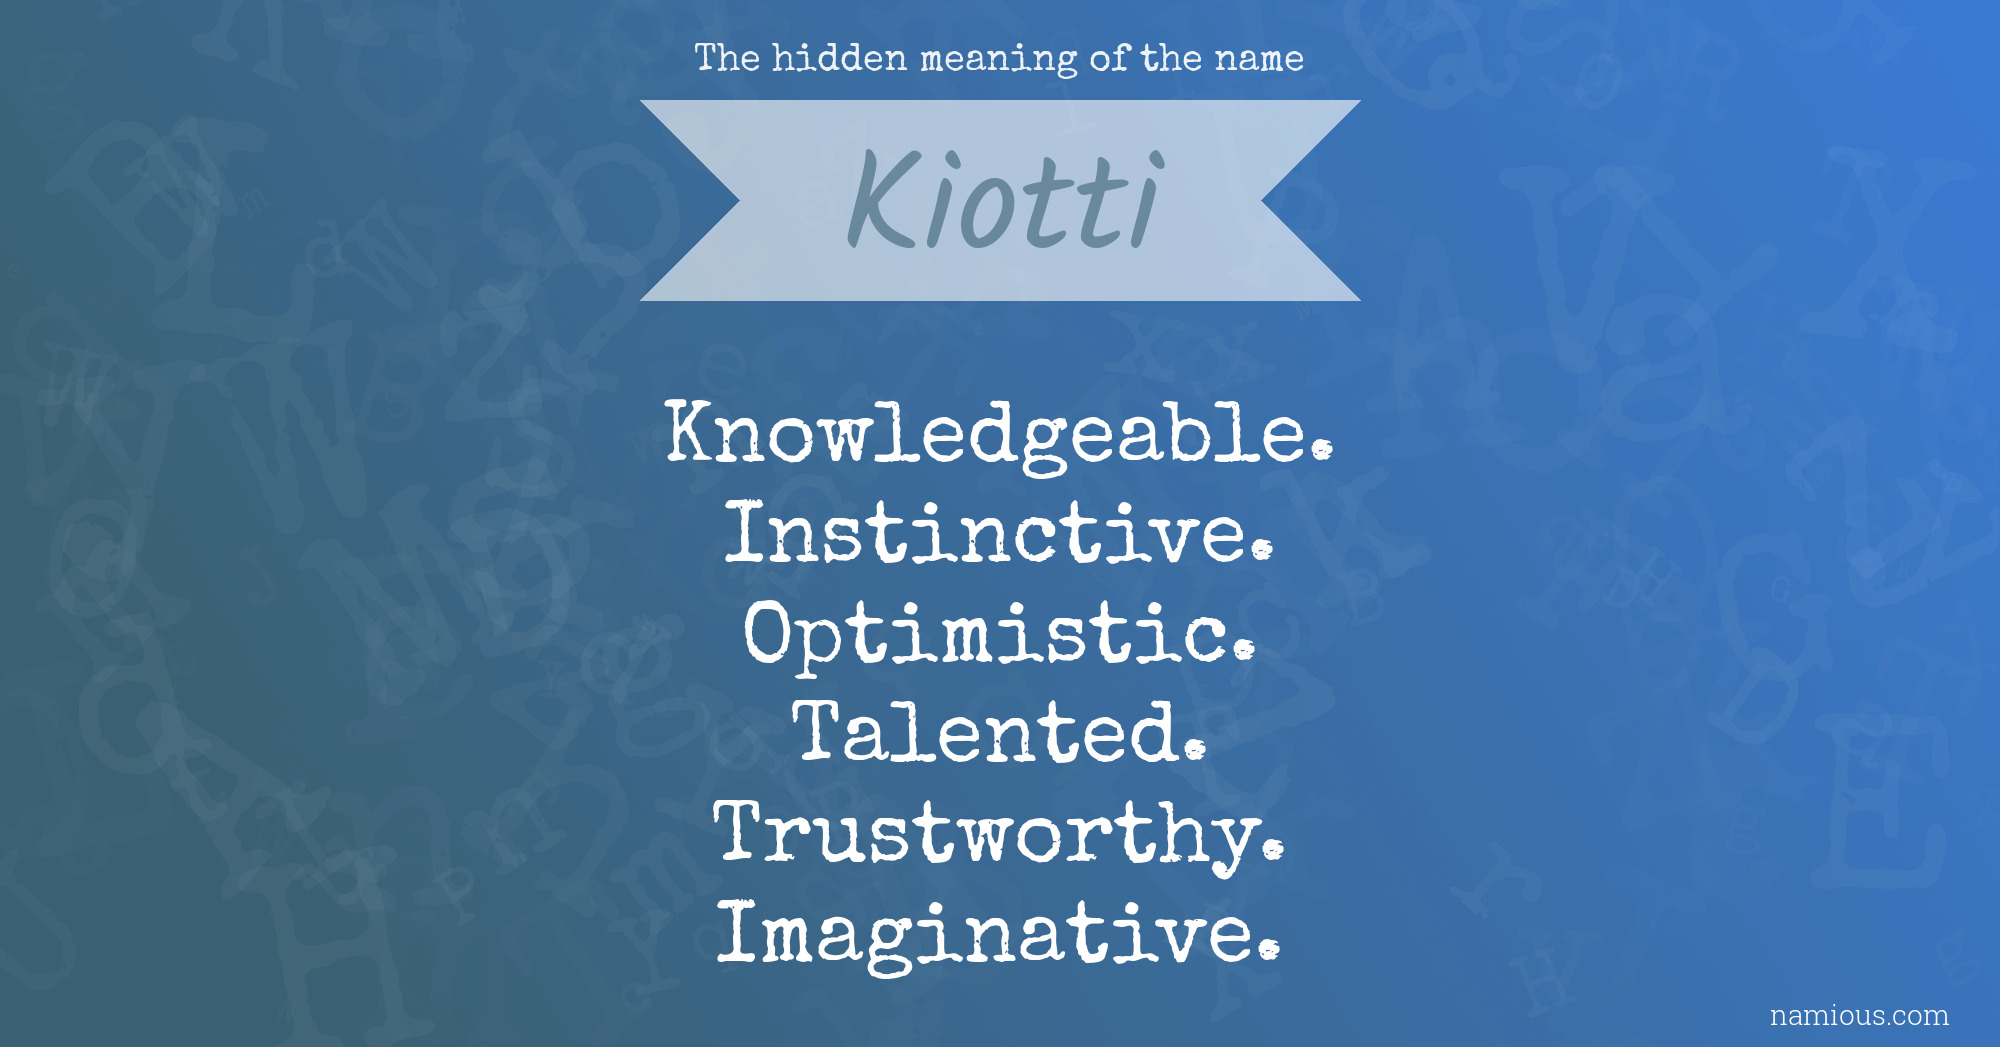 The hidden meaning of the name Kiotti